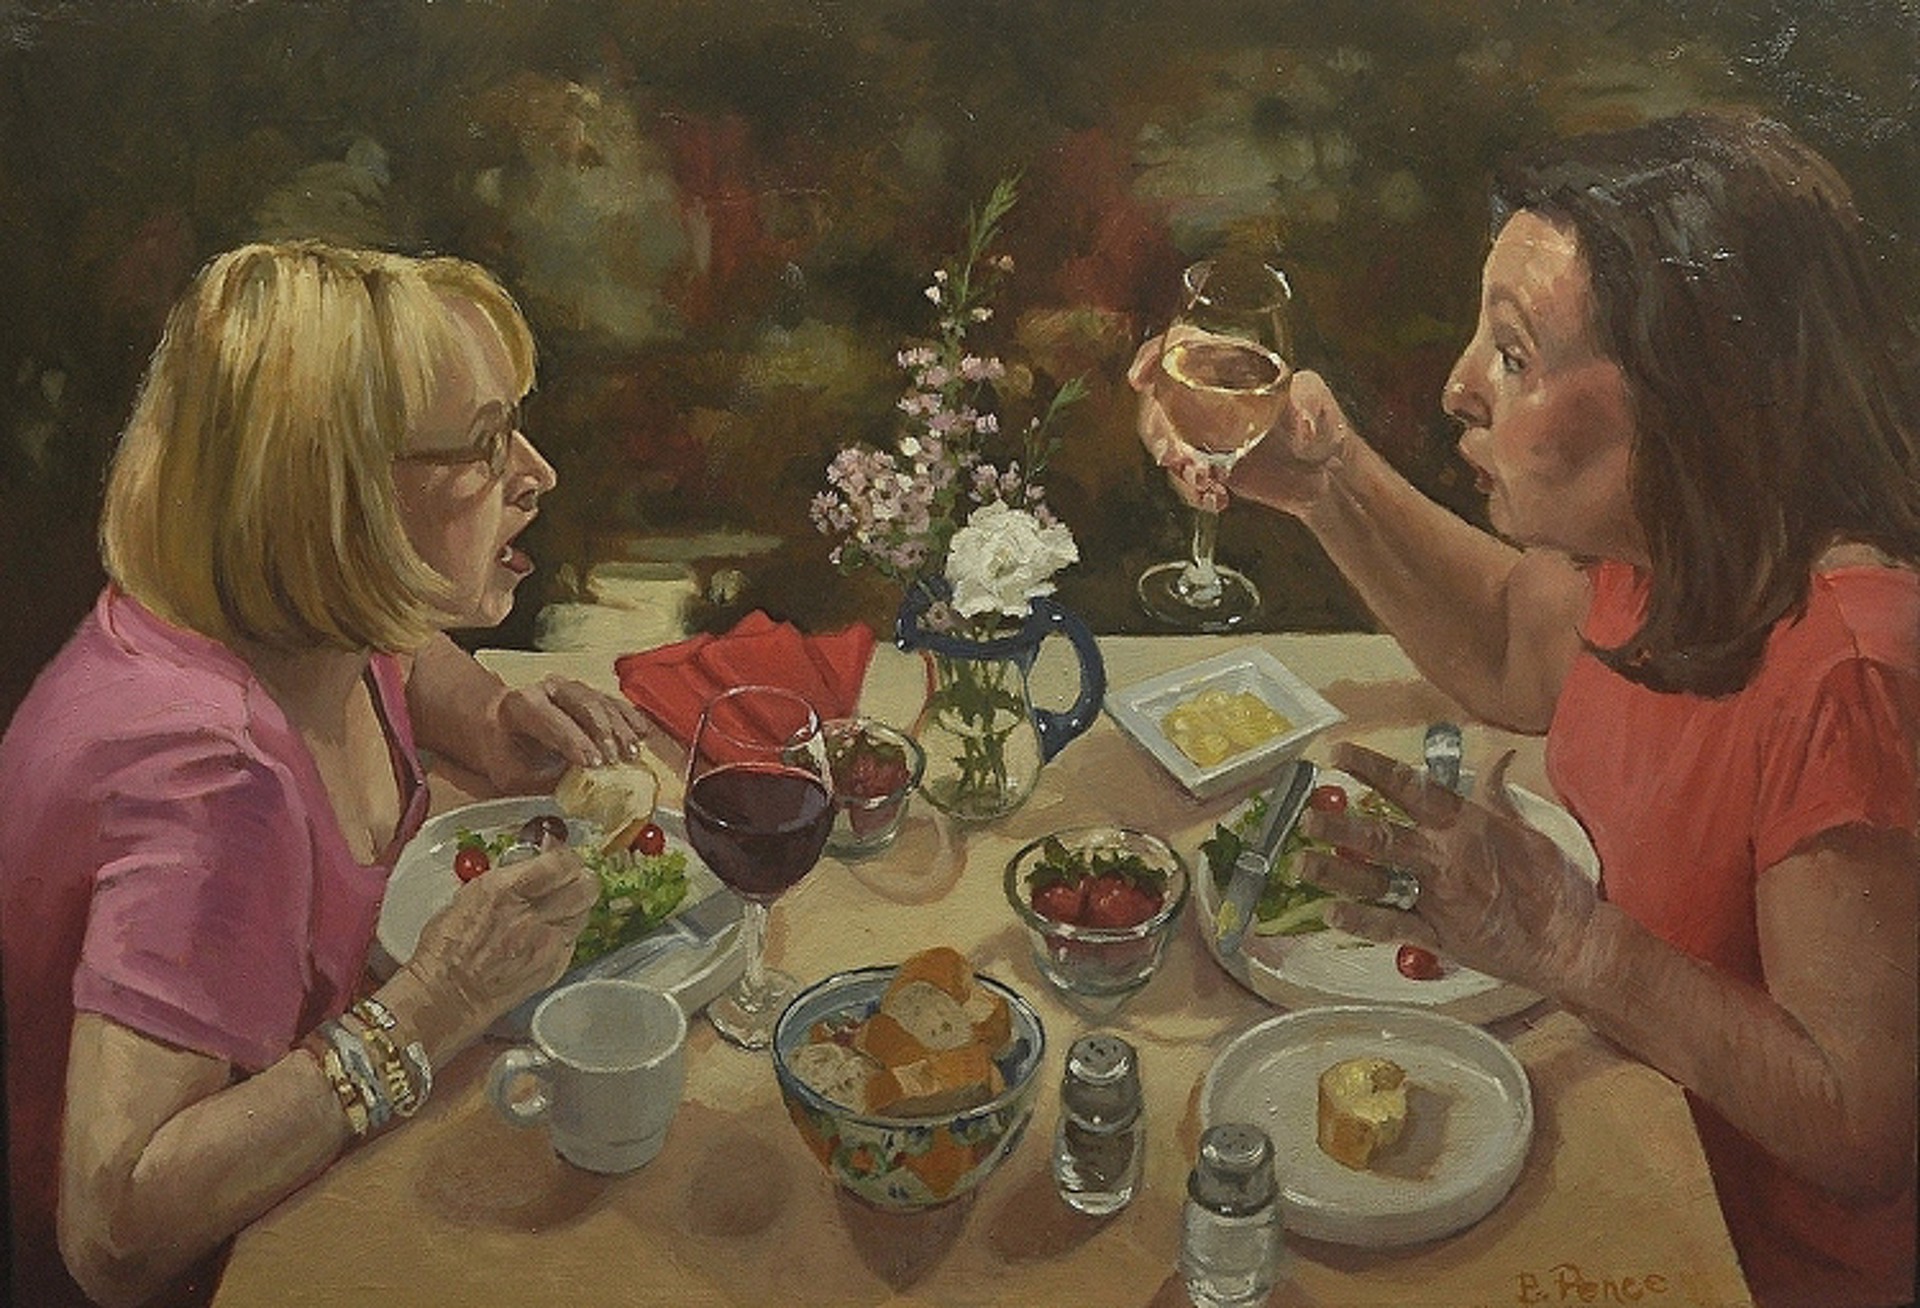 Over Lunch by Barbara Pence